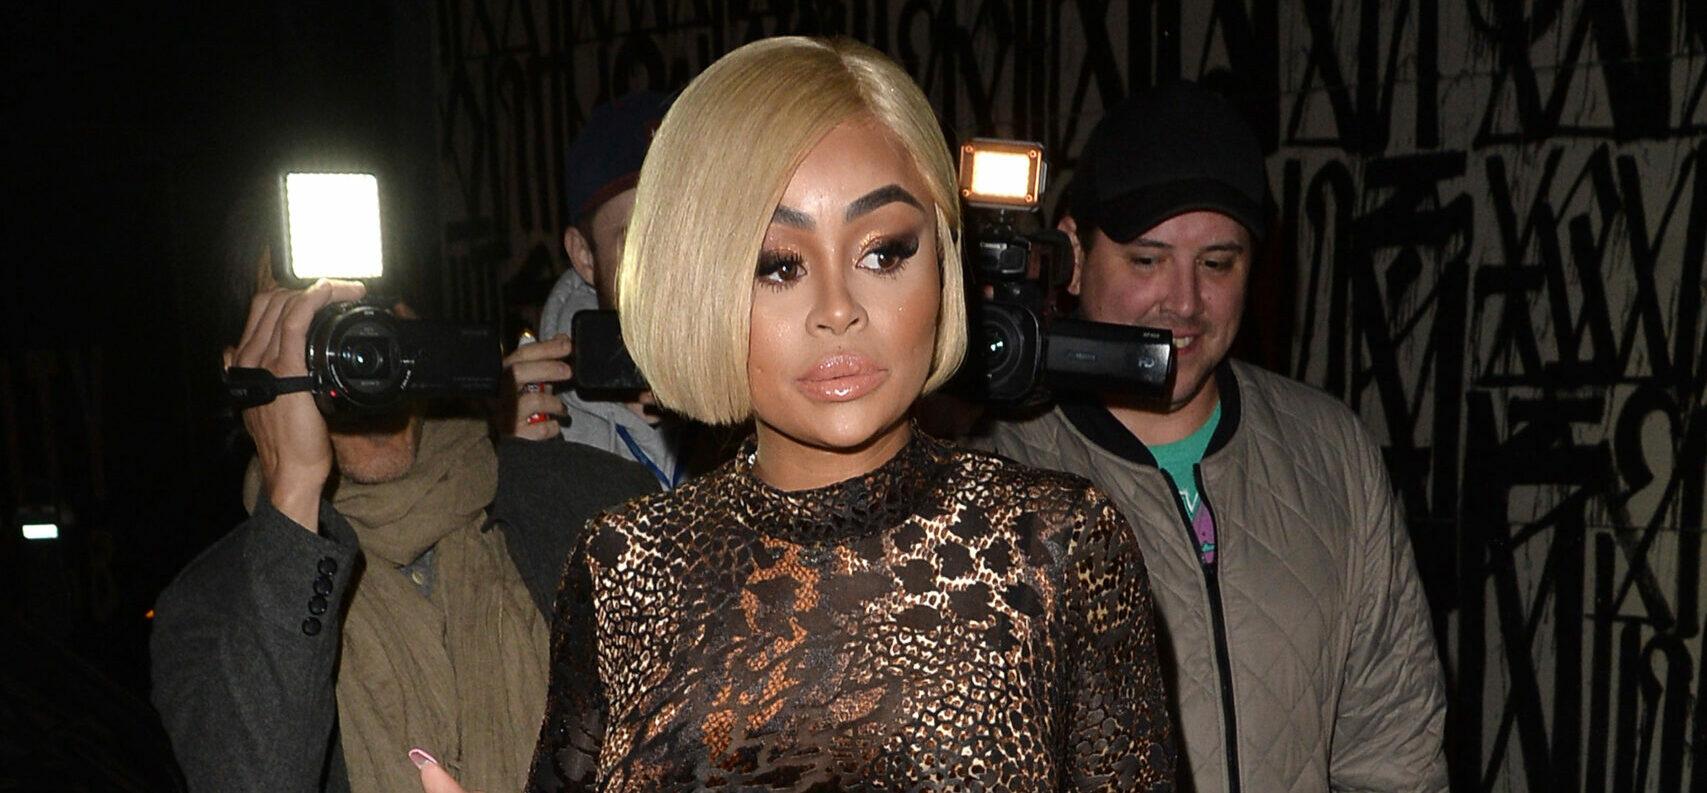 Blac Chyna Dines at Craigs in a Daring Outfit